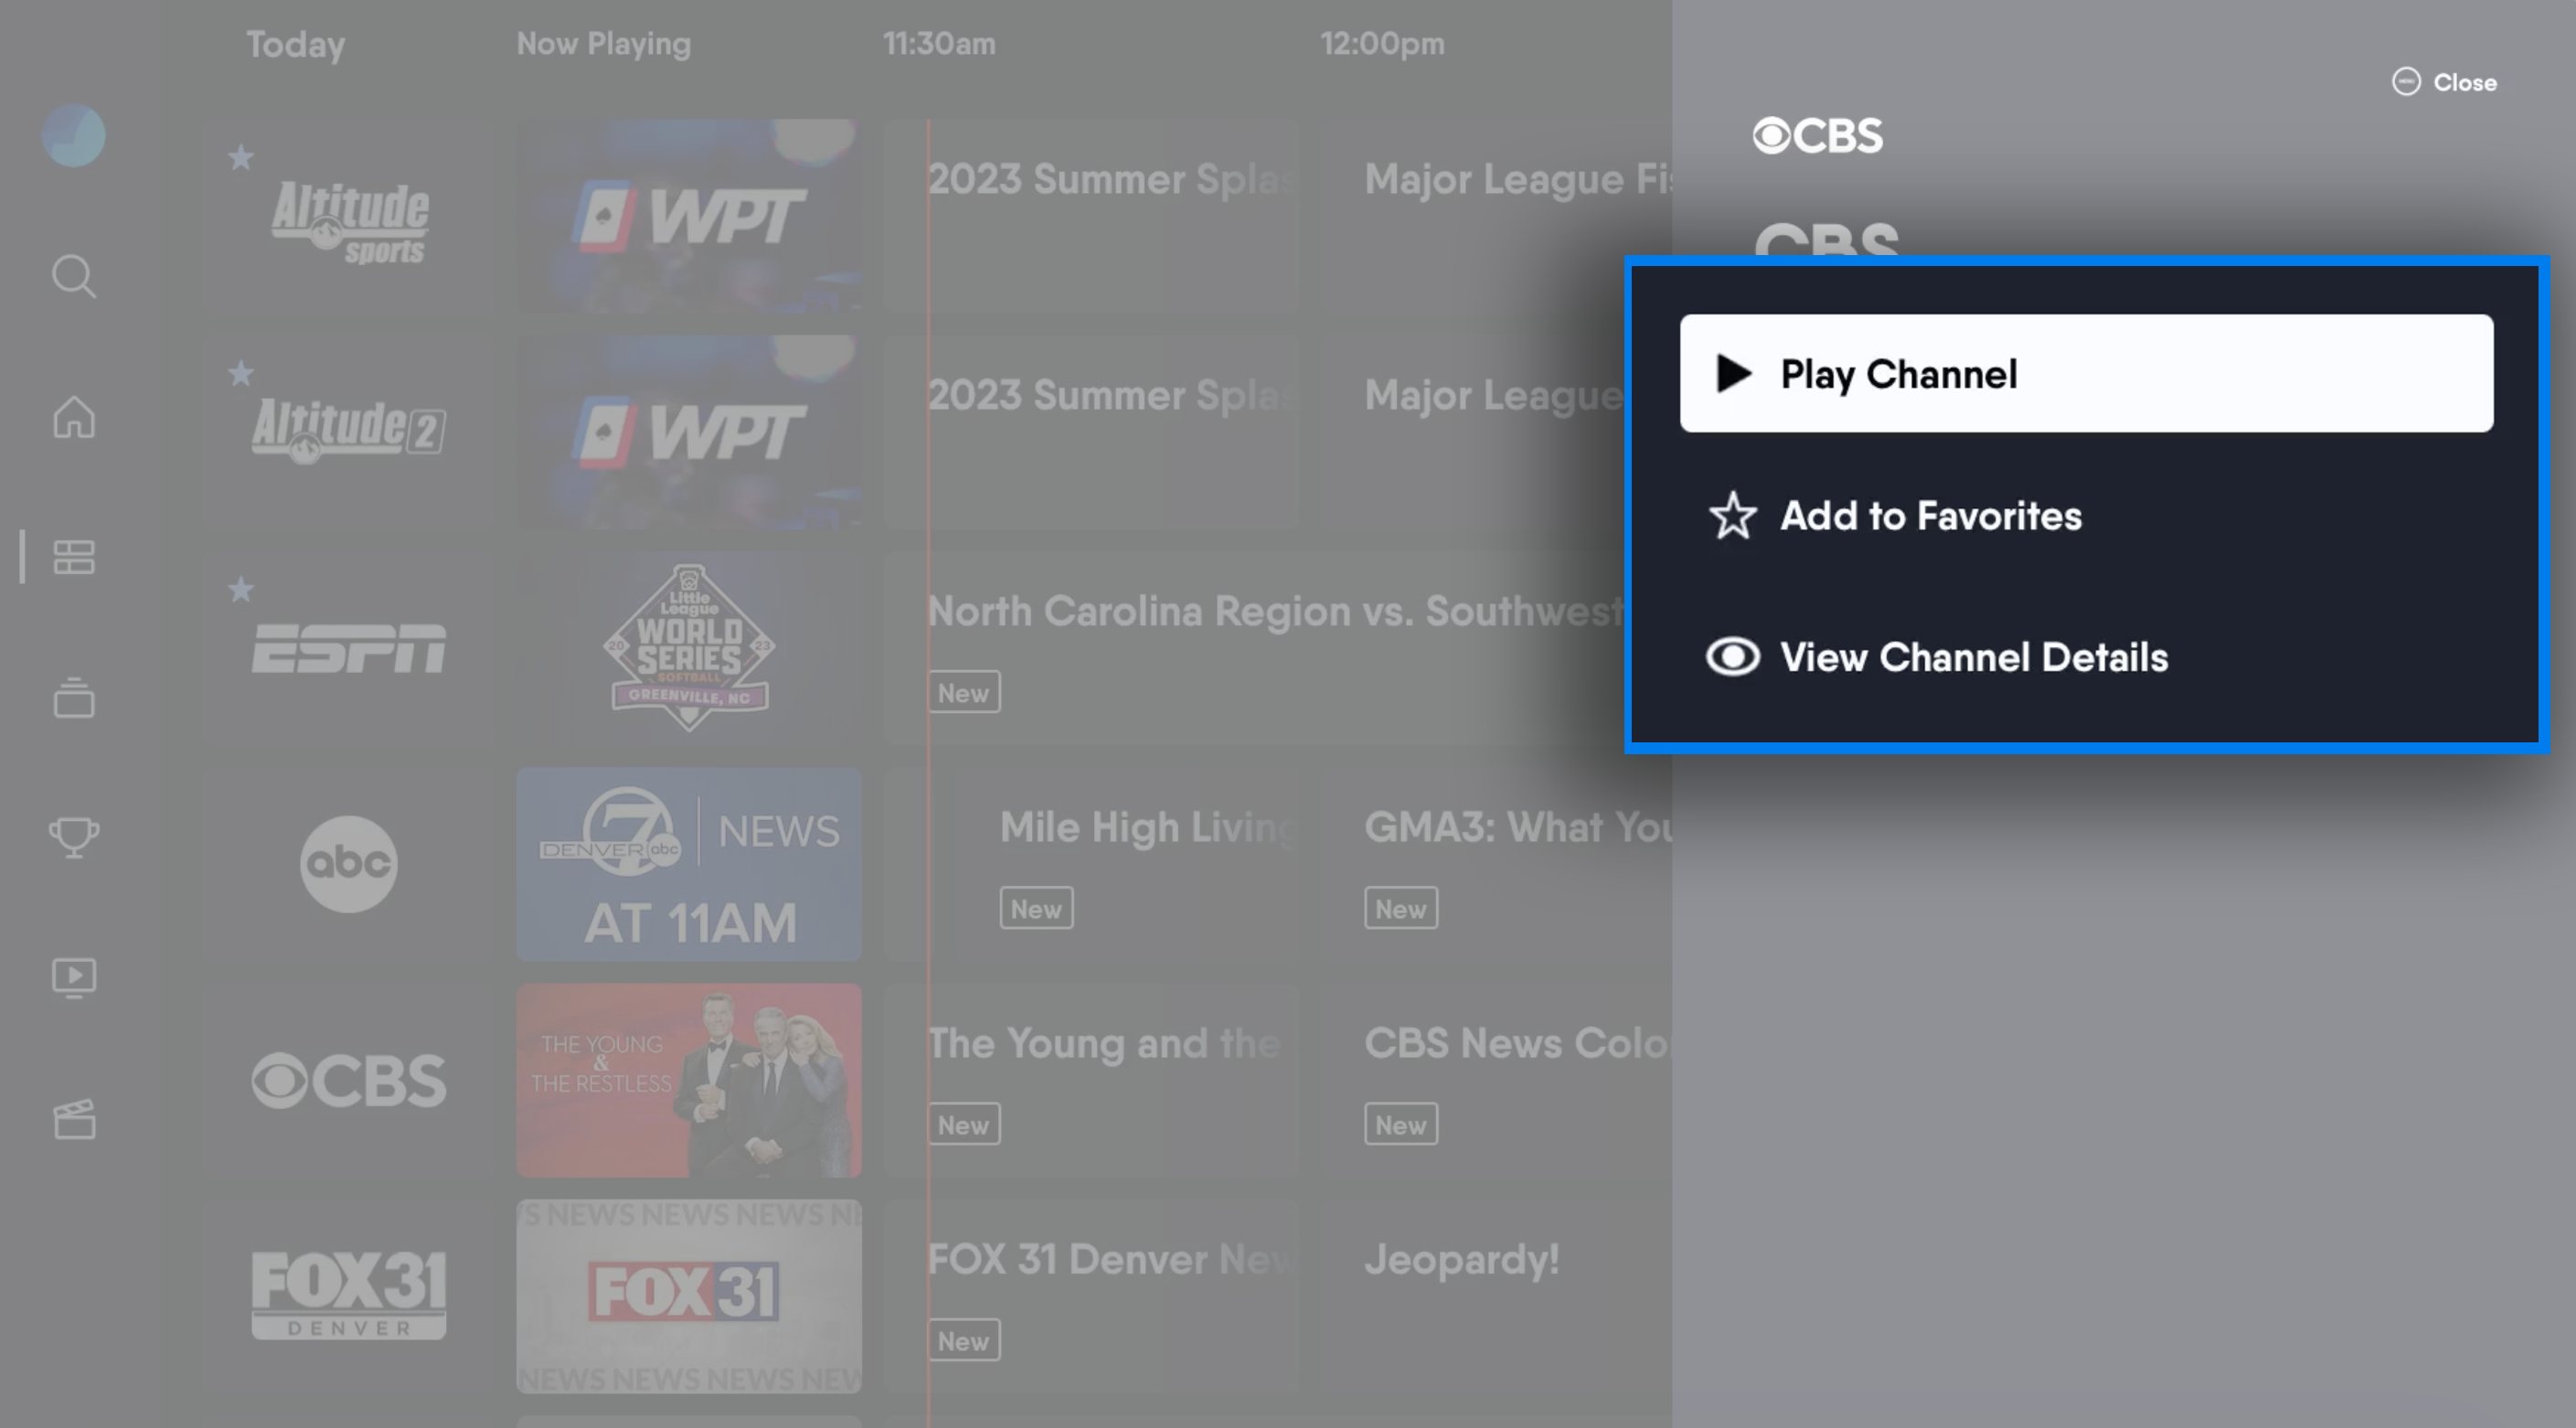 Channel context menu of the Fubo app with options to play a channel, add it to favorites, or view channel details